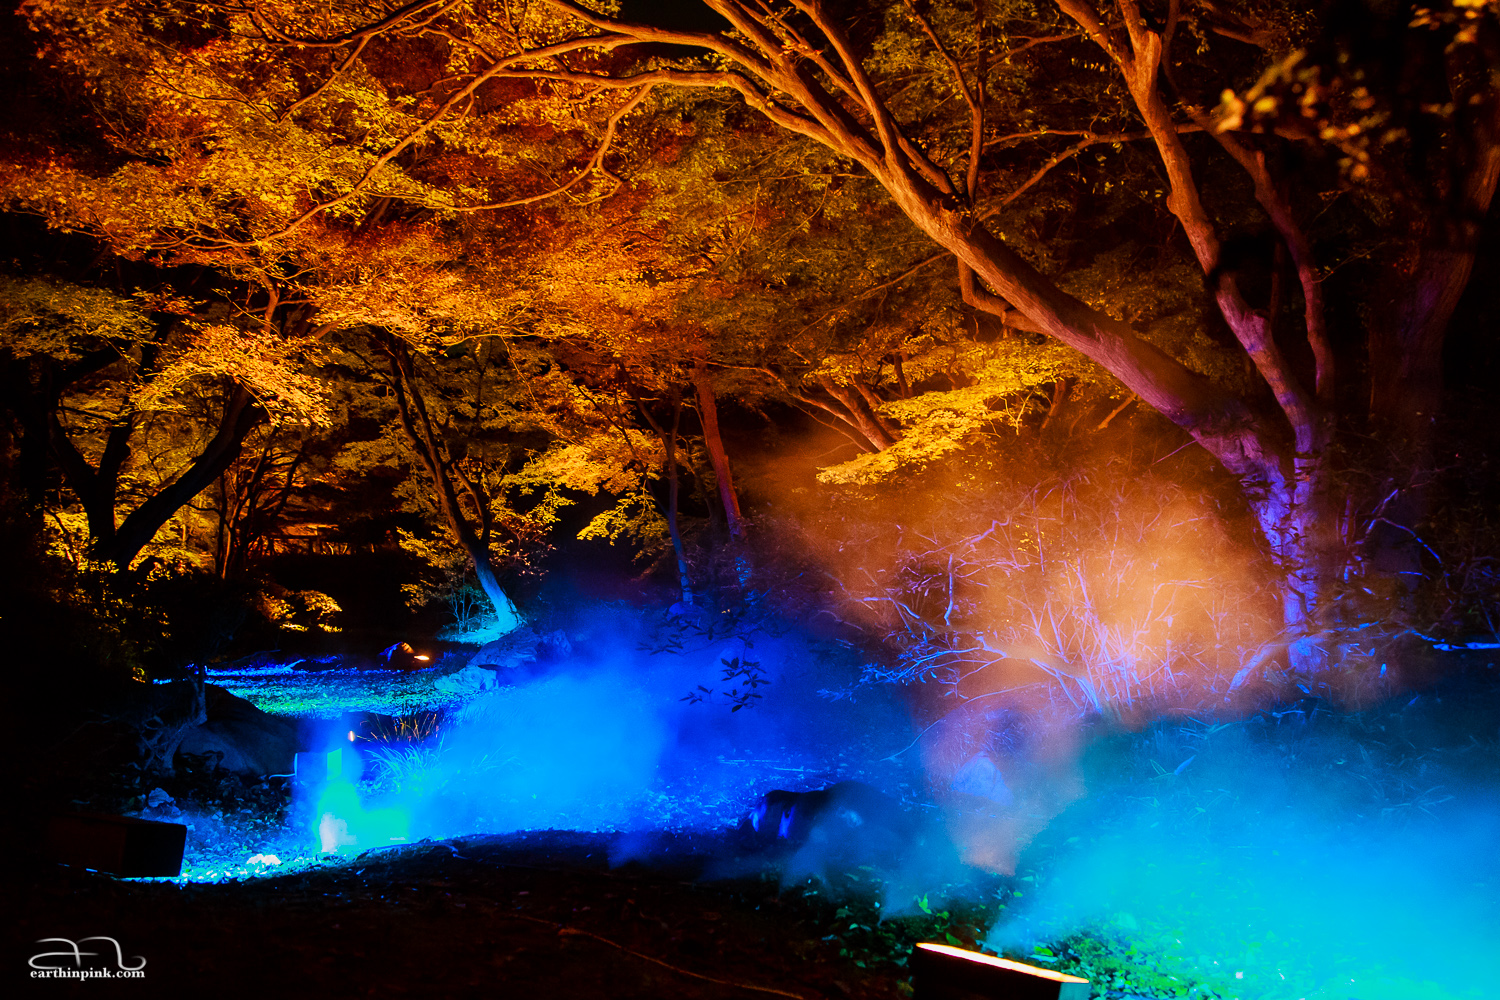 Night illumination in central Tokyo's Rikugien Koen can create pretty surreal looks, especially when colorful lights and artificial smoke are added to the picture.